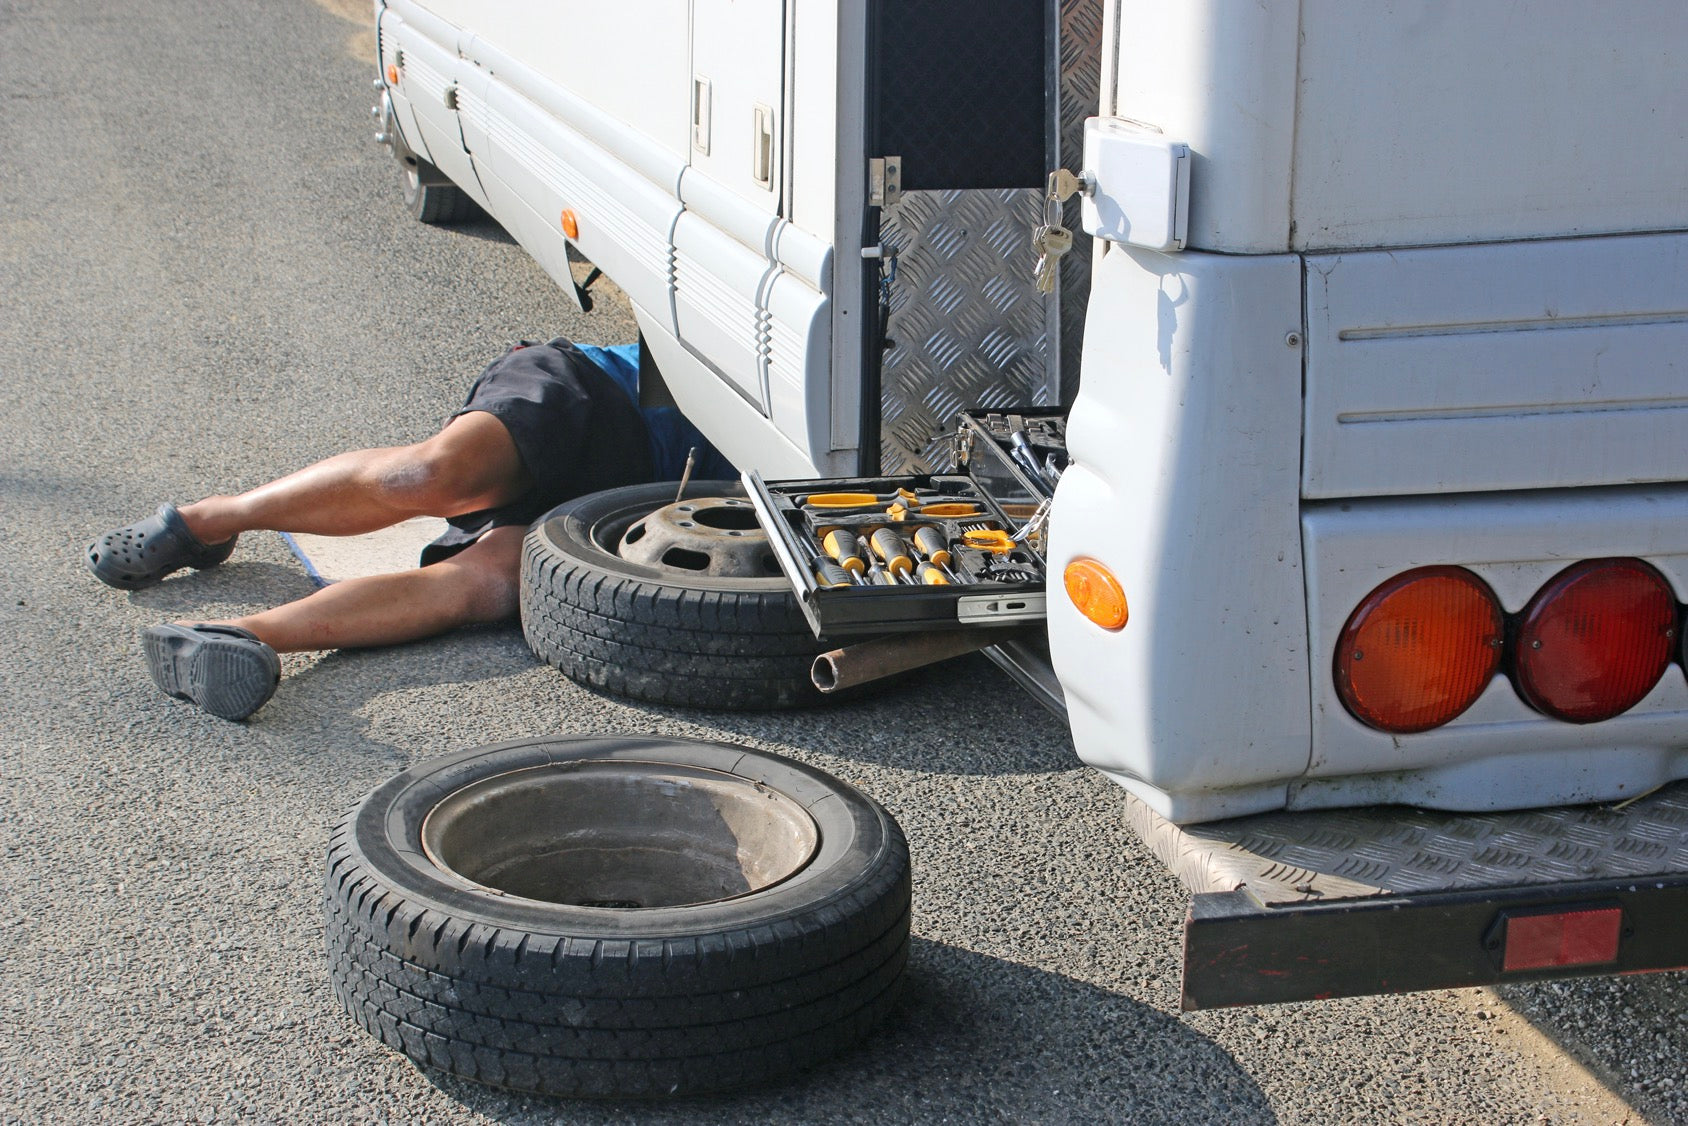 Man under recreational vehicle changing tire